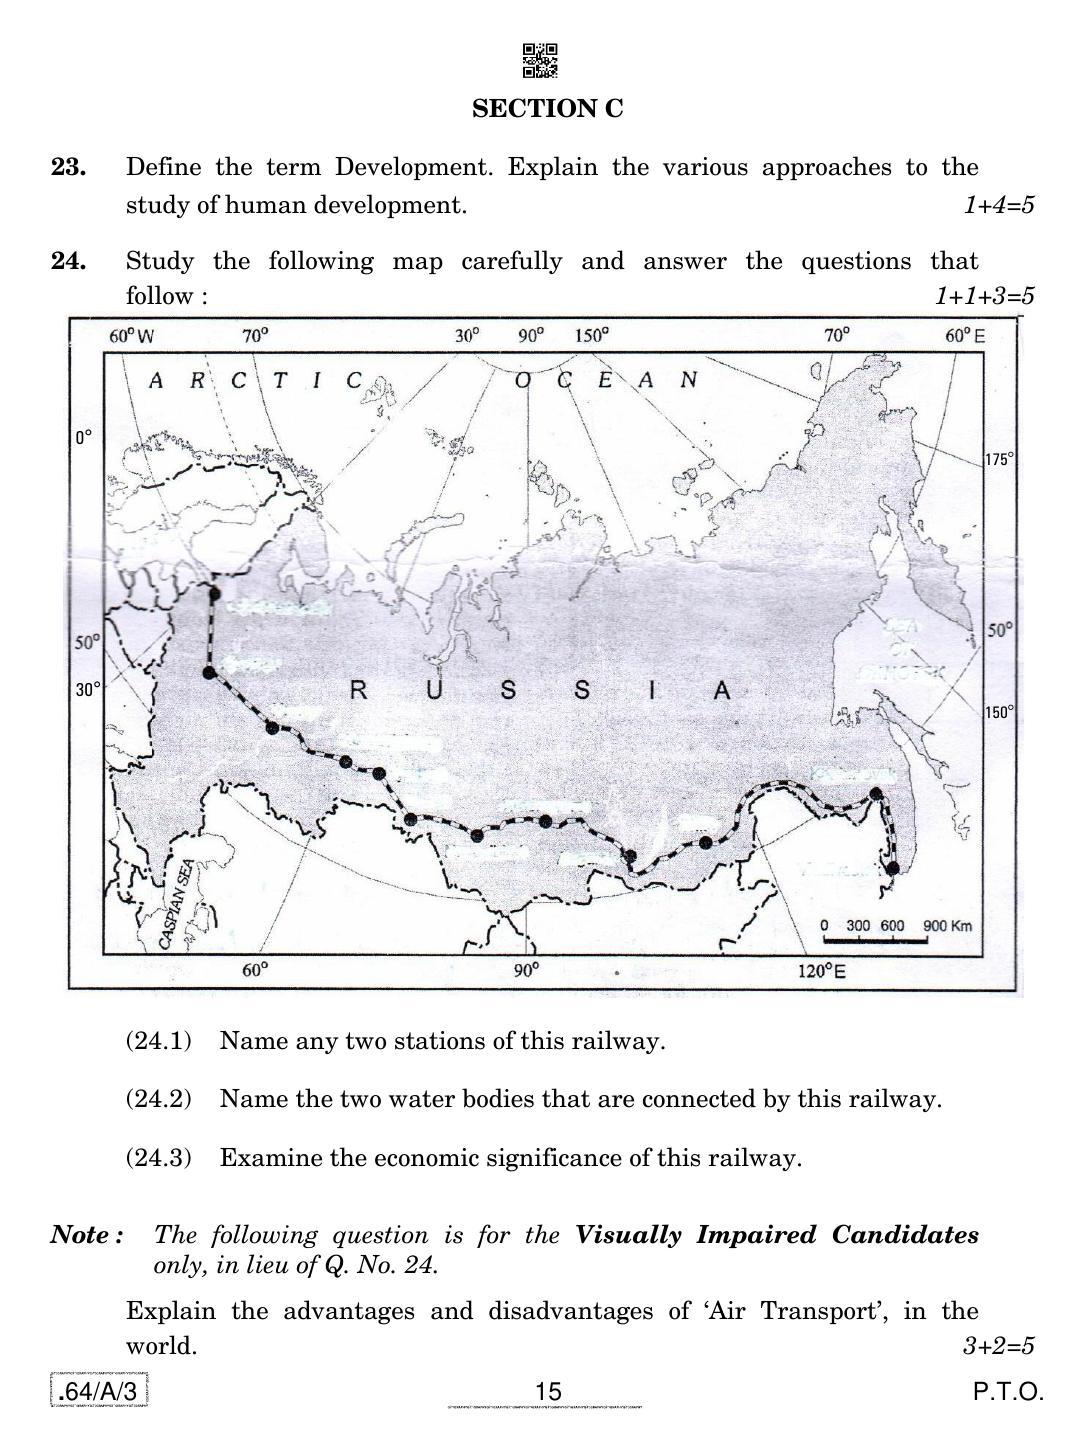 CBSE Class 12 64-C-3 - Geography 2020 Compartment Question Paper - Page 15